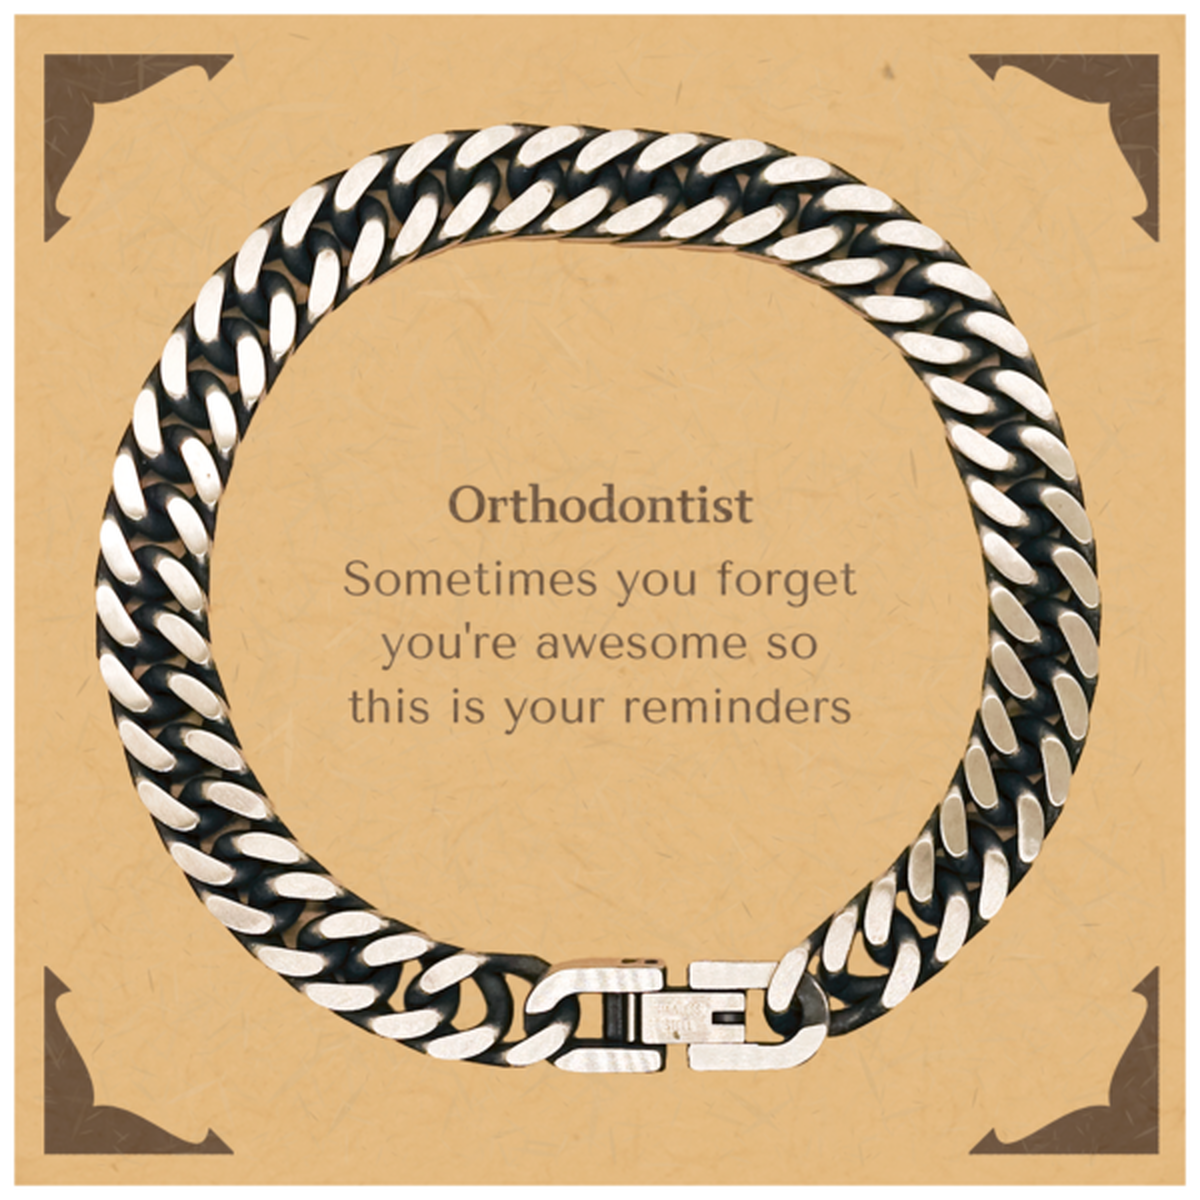 Sentimental Orthodontist Cuban Link Chain Bracelet, Orthodontist Sometimes you forget you're awesome so this is your reminders, Graduation Christmas Birthday Gifts for Orthodontist, Men, Women, Coworkers